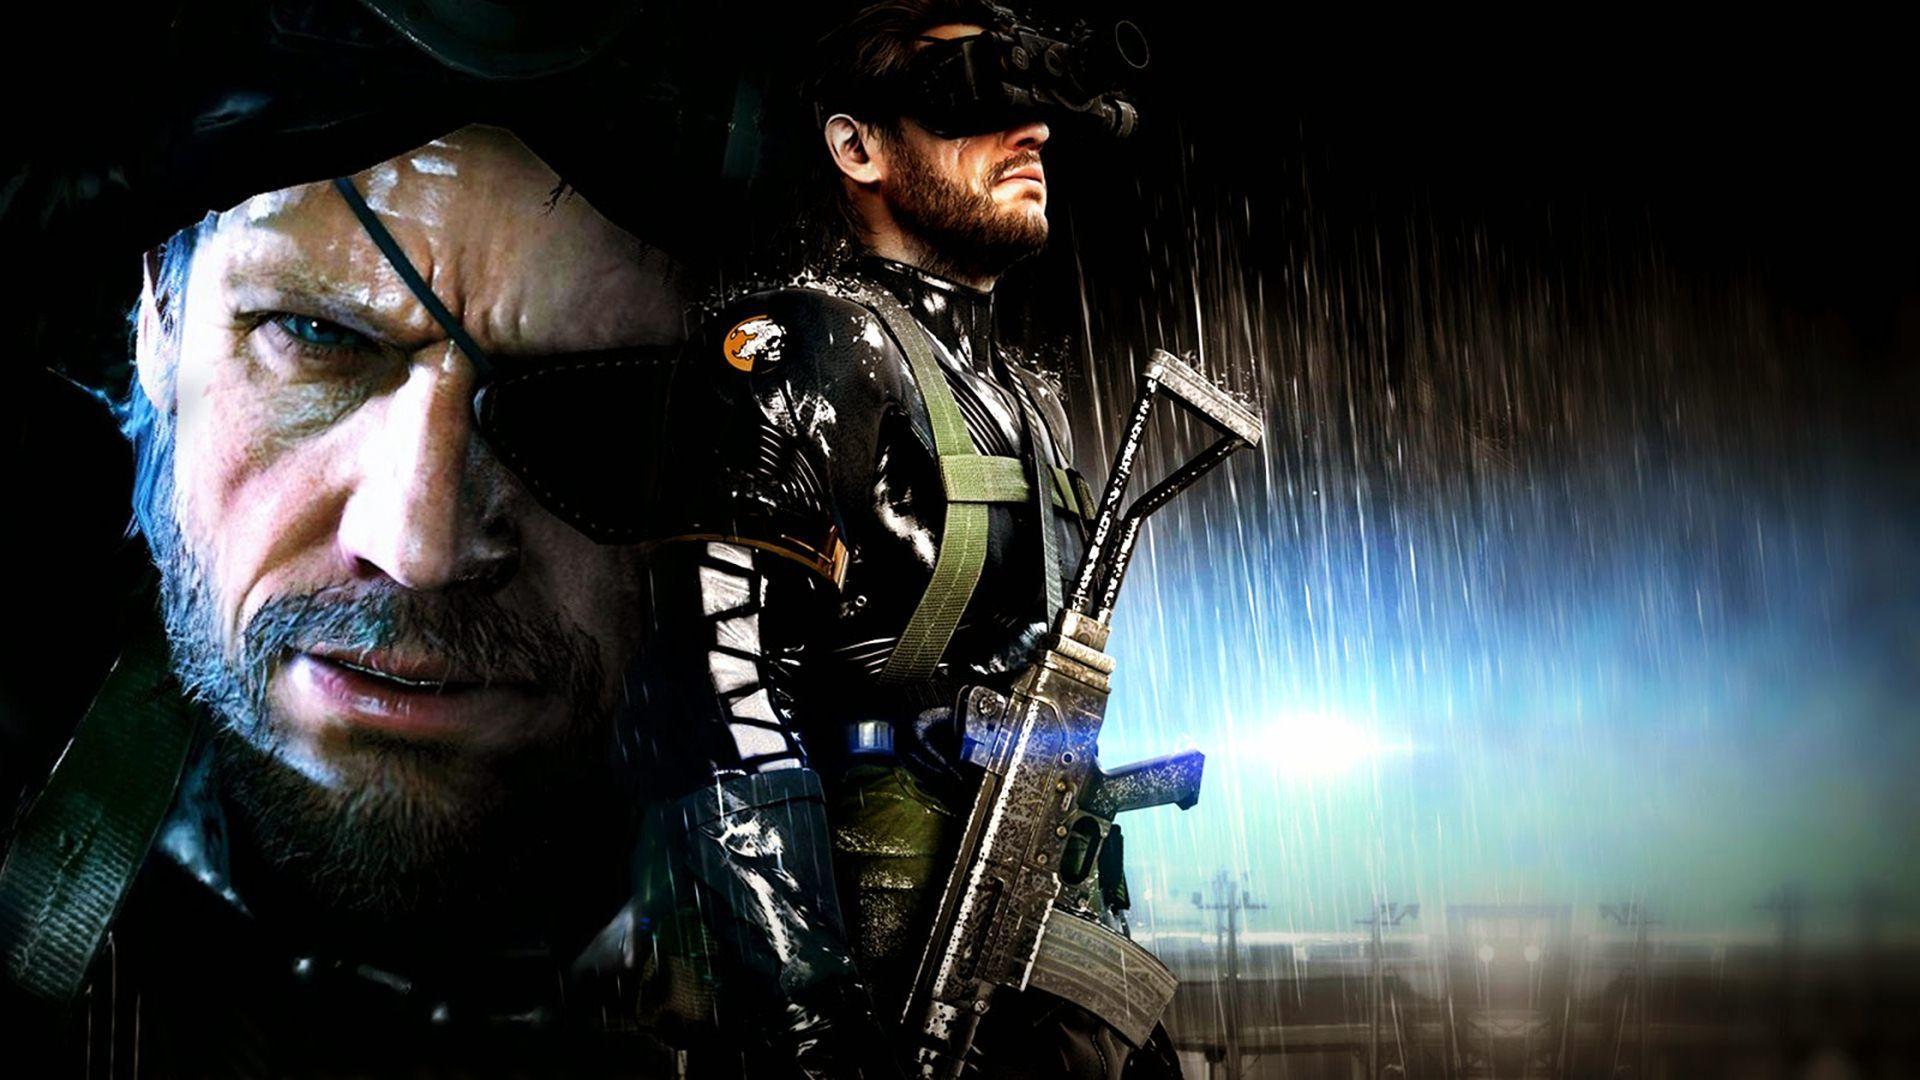 Metal Gear Solid 5: The Phantom Pain Wallpaper, Picture, Image